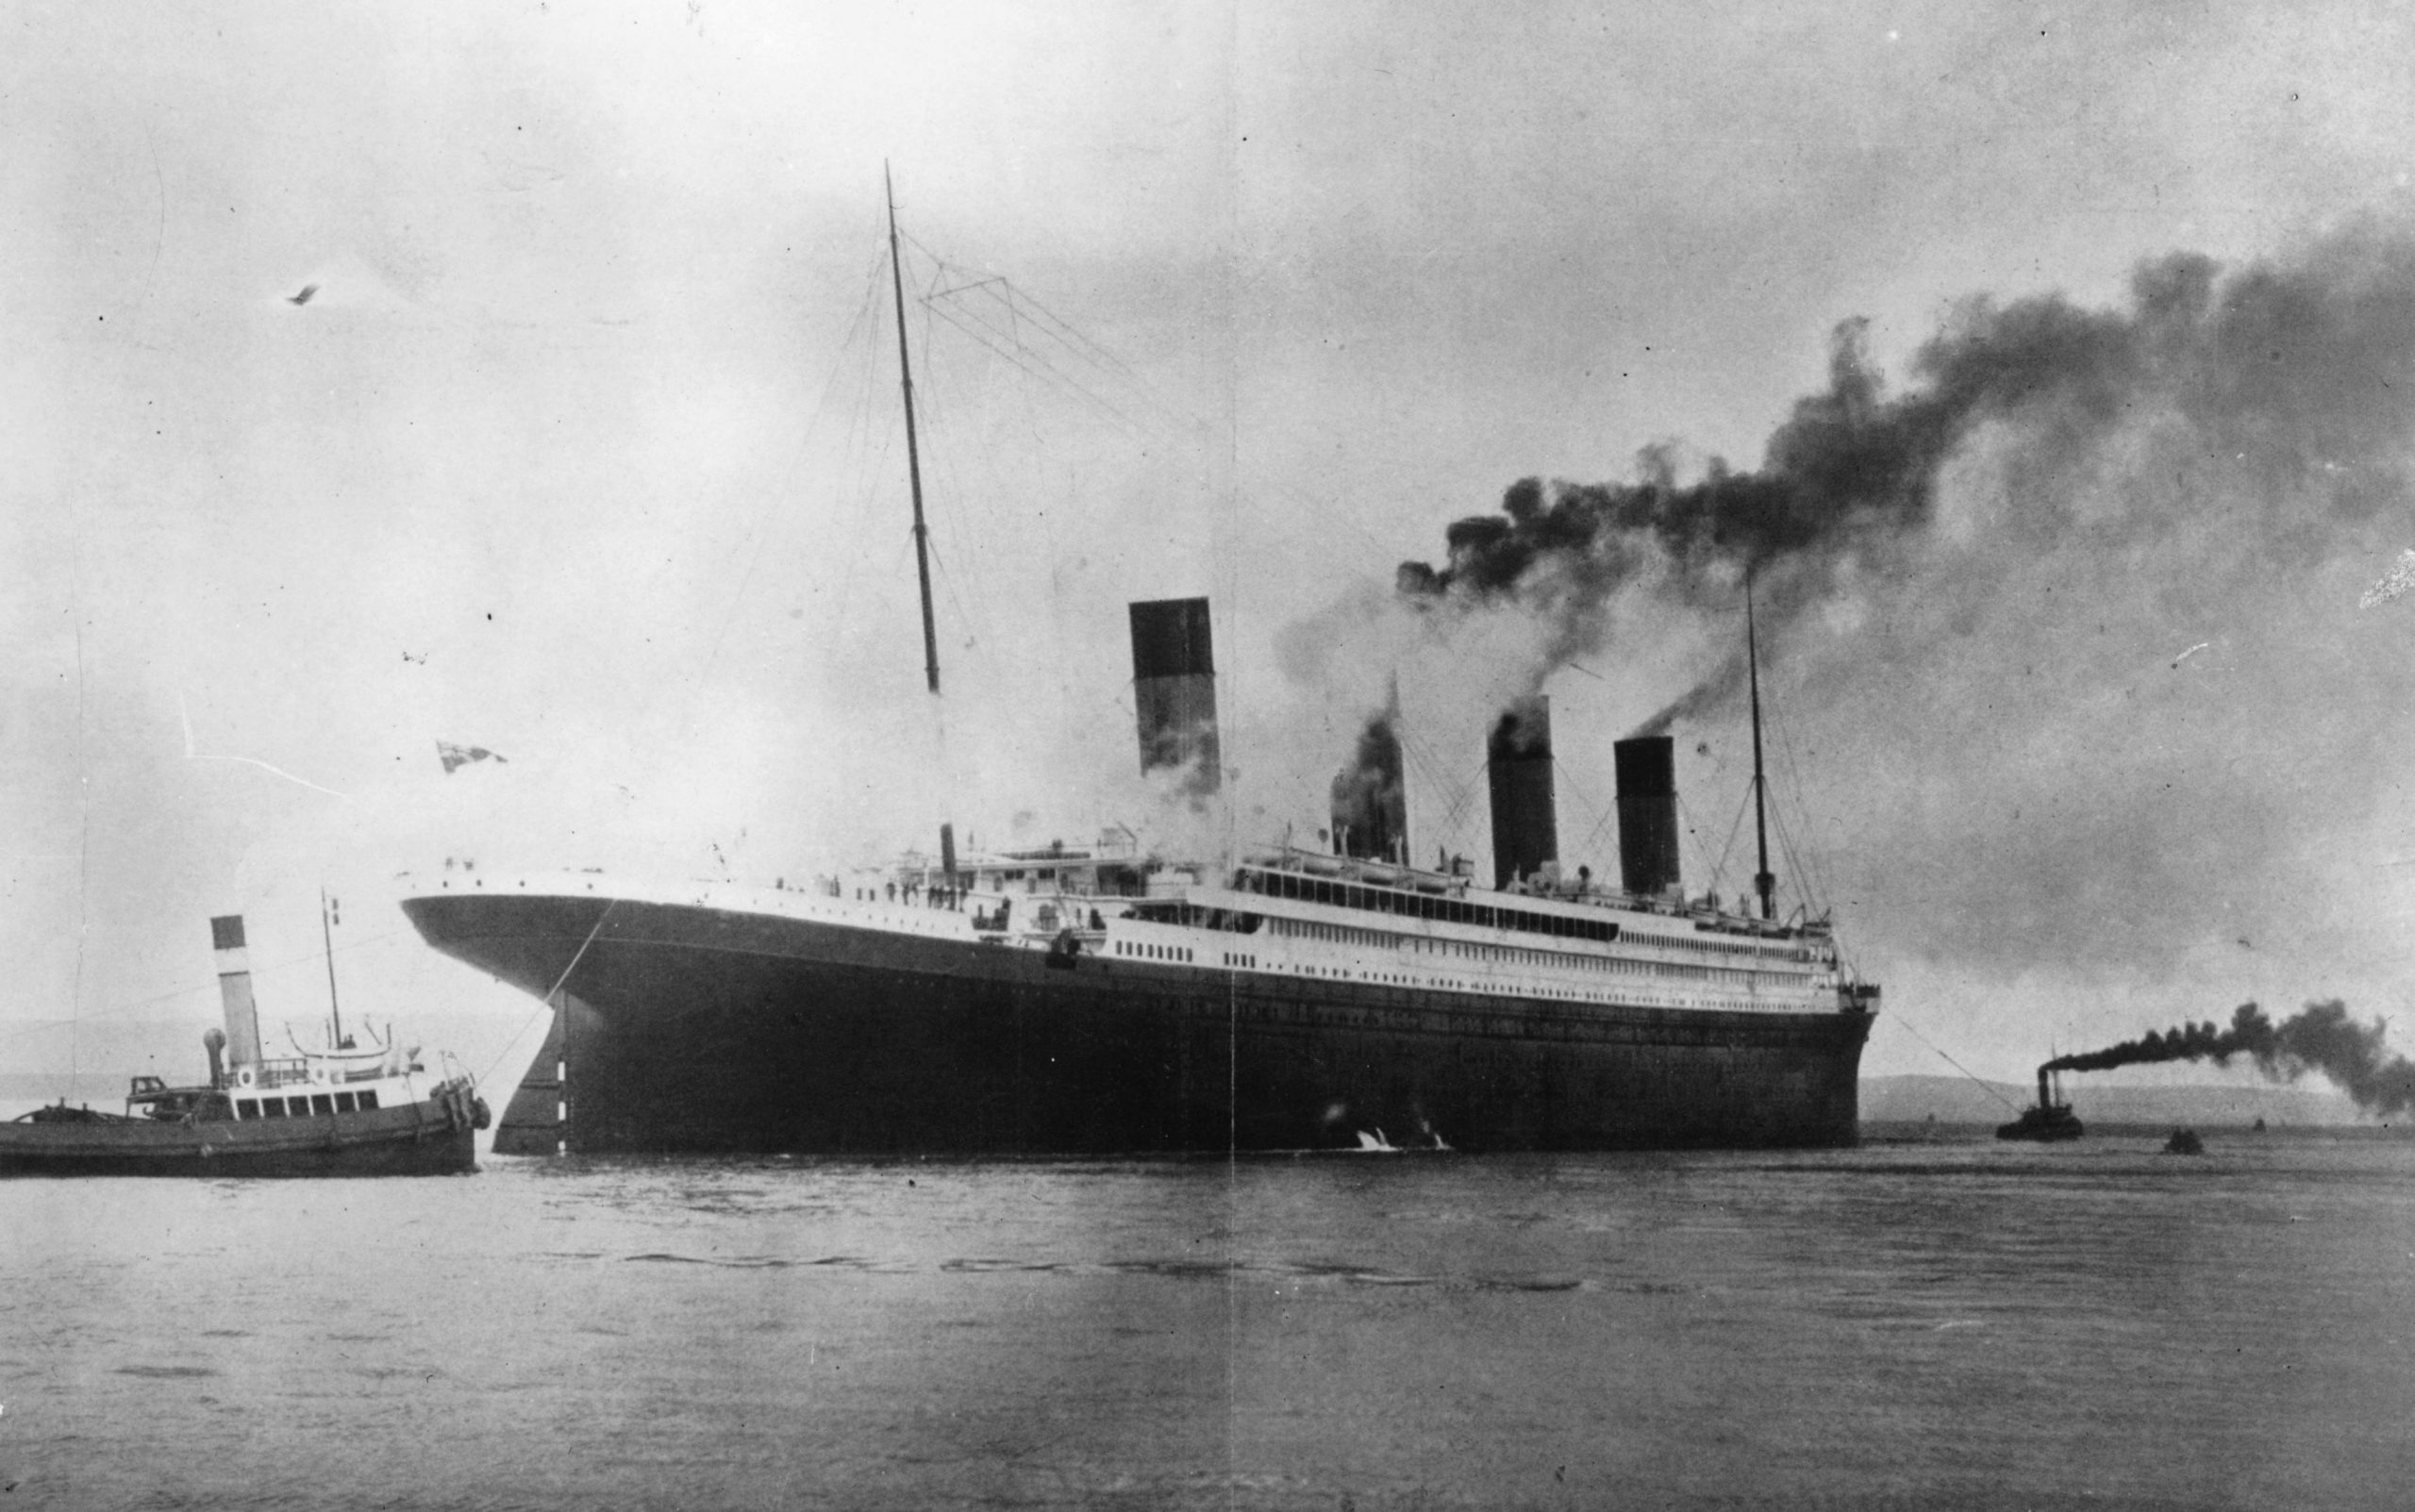 <p>One of the most famous disasters in history, the April 15, 1912, sinking of the RMS Titanic continues to captivate modern imagination over 100 years later. Its biggest fascination may be in that the Titanic represents so perfectly humans' hubris in the face of nature: The ship was an engineering marvel deemed "unsinkable," but it did just that after striking an iceberg on its maiden voyage. The Titanic's sinking, which occurred just a couple of years before World War I, also marked the beginning of the end of the glamorous and forward-looking Edwardian era, which as the 1997 movie <a href="https://www.amazon.com/dp/B00A3ZJIY6/?tag=reader_msn-20" rel="nofollow noopener noreferrer"><em>Titanic</em></a> showed, was also an era of class differences and repression. But as much as you think you know about this now-mythic ship, the Titanic continues to surprise us. We uncovered <a href="https://www.rd.com/article/the-unsinkable-titanic/">these little-known tidbits about the unsinkable Titanic</a> you've never heard before.</p>